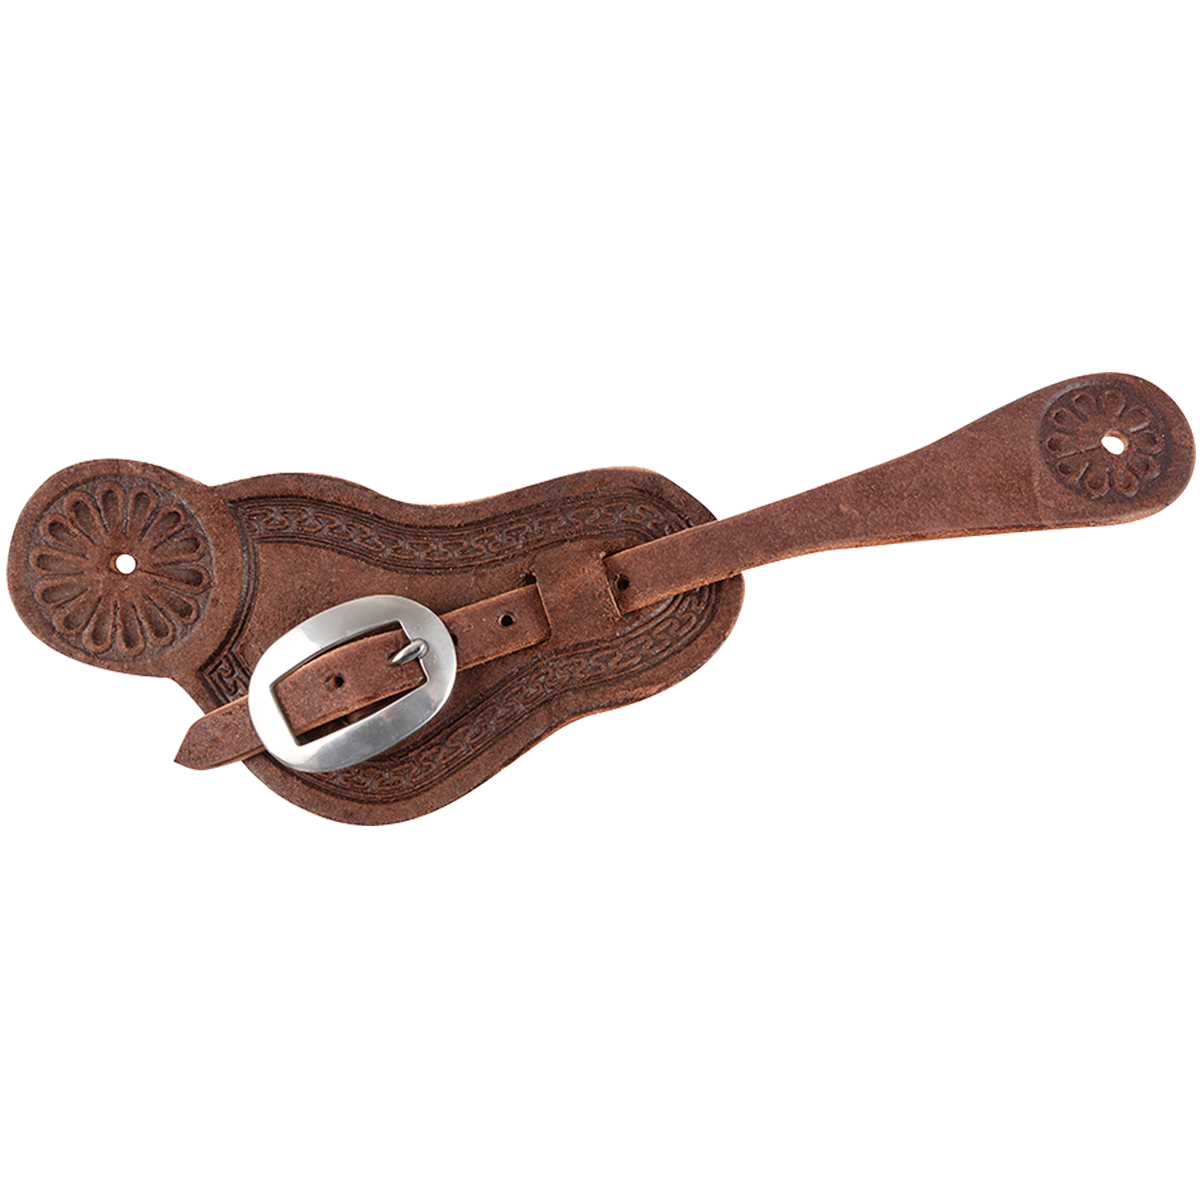 Spur Strap #5 Chocolate Leather With San Carlos Border